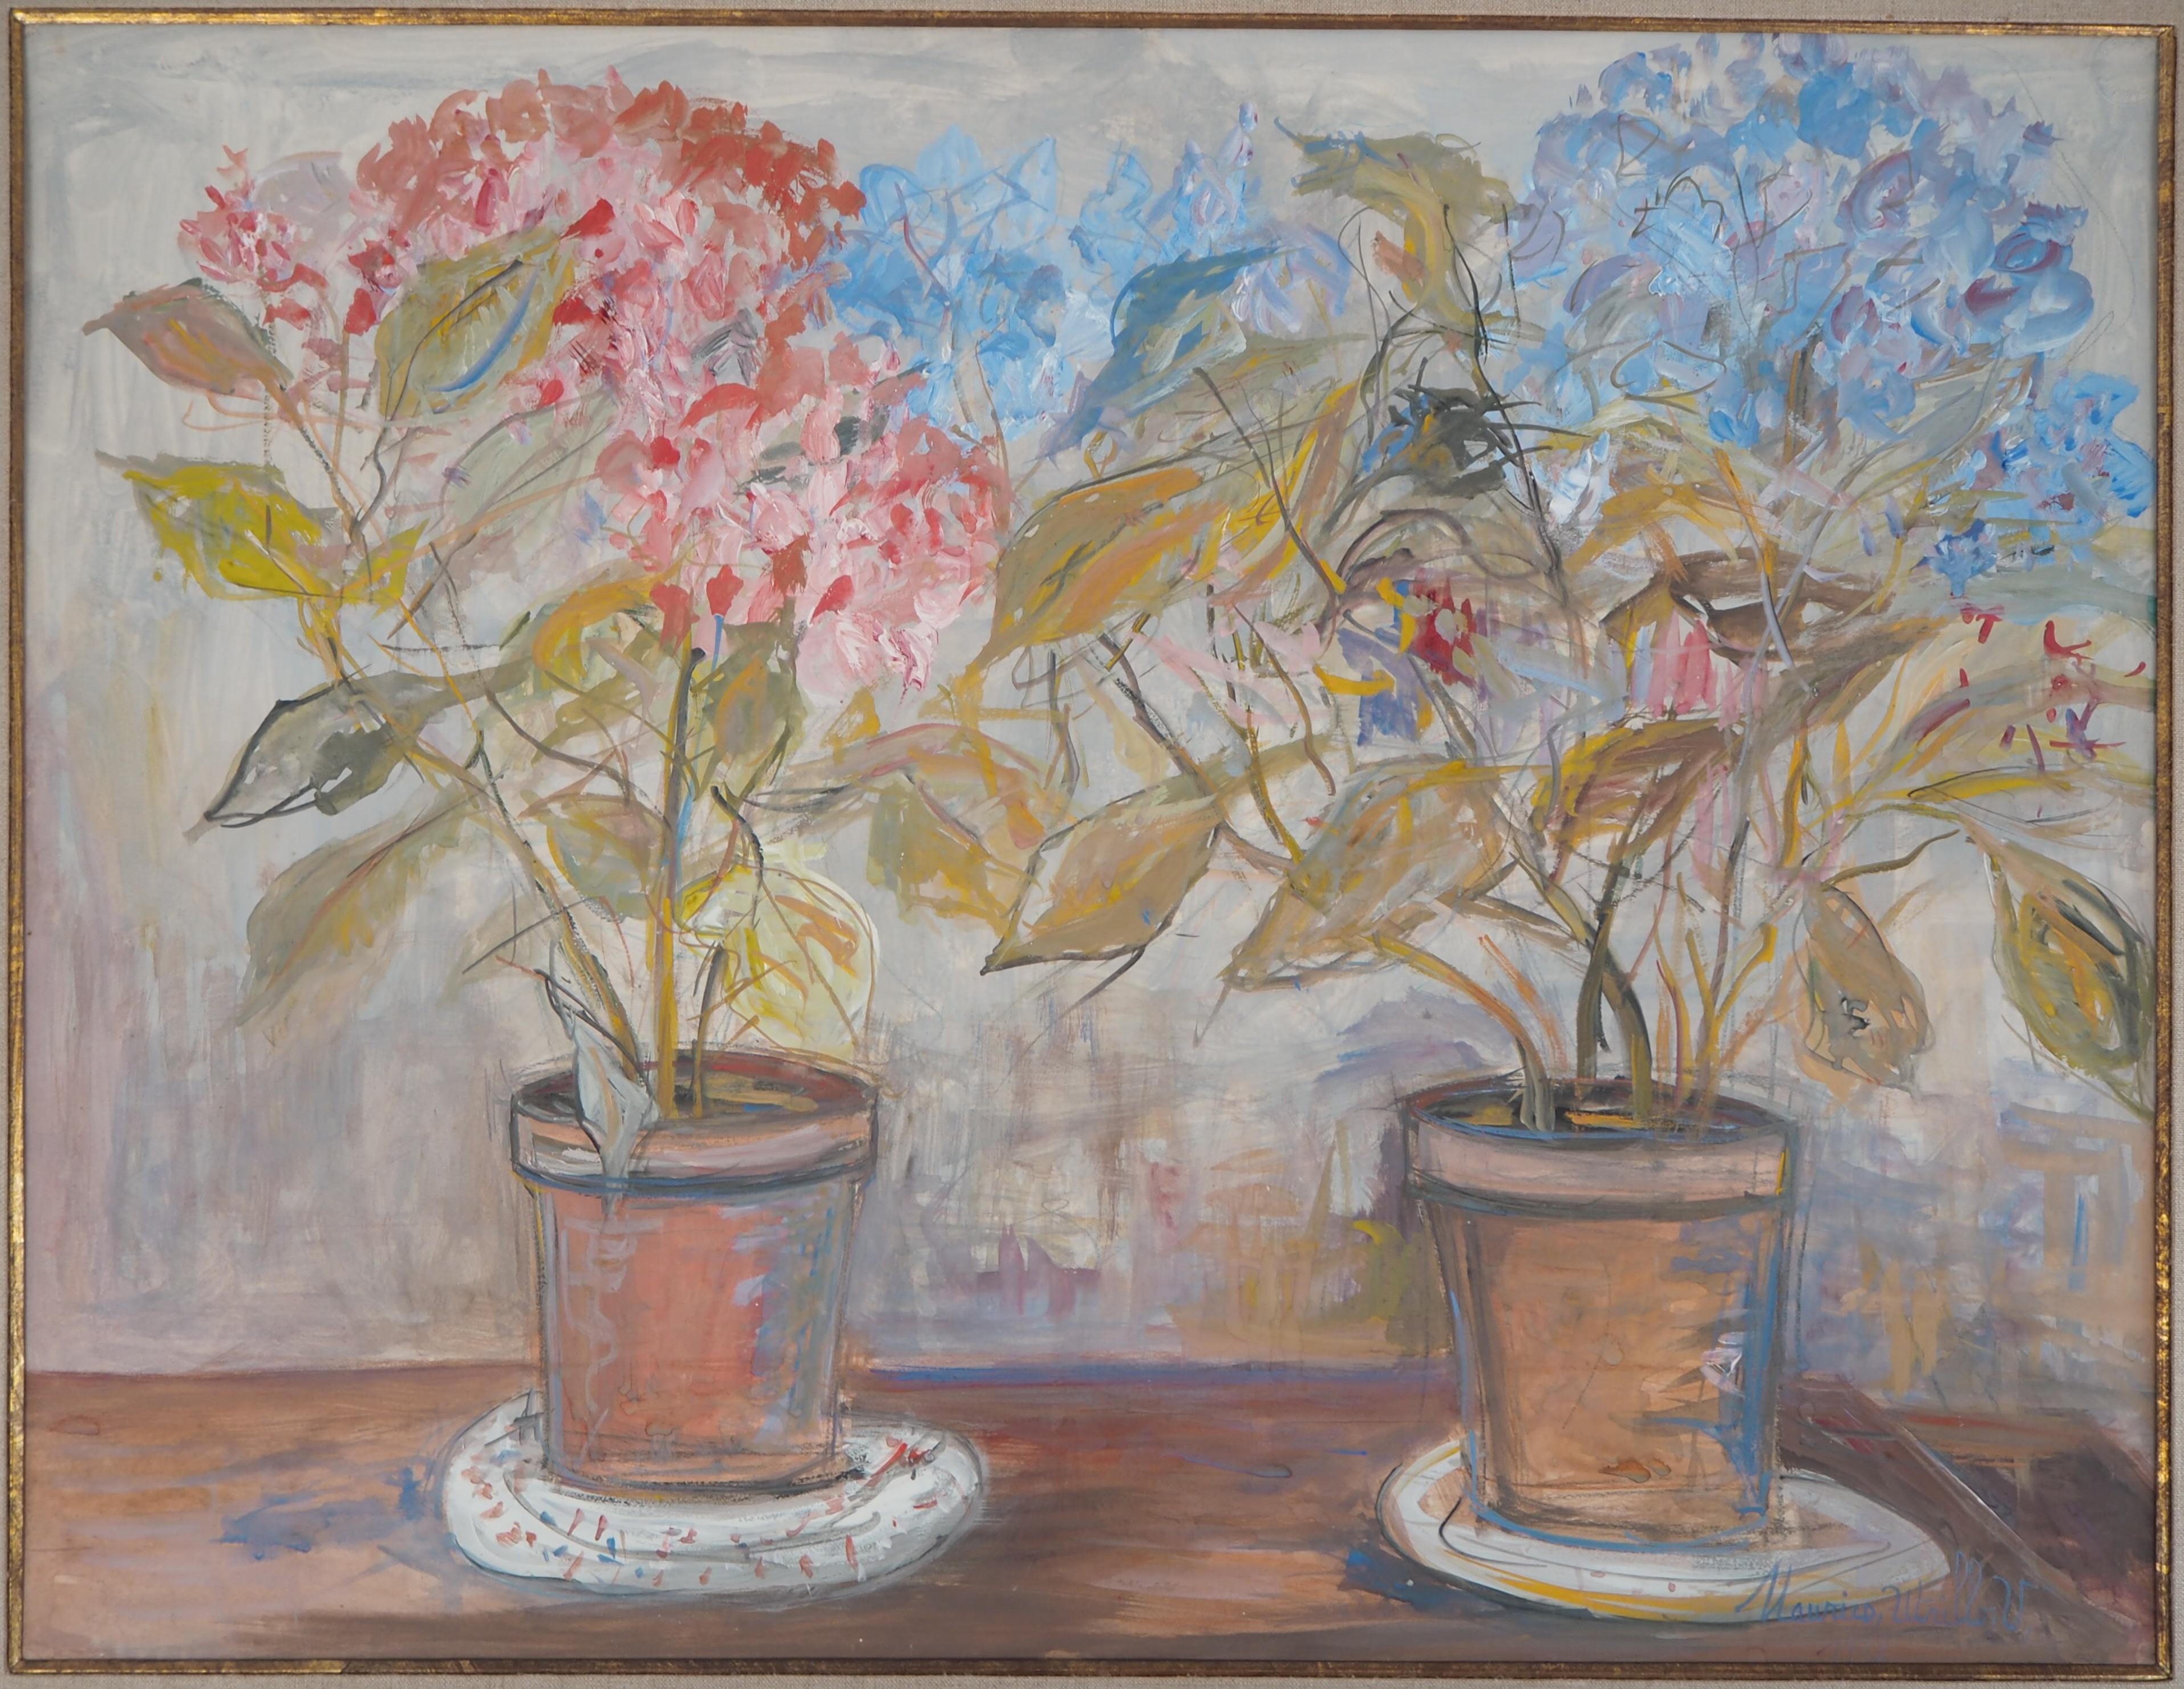 Pink and Blue Hydrangeas - Tall Original gouache painting, Signed - Cerificate - Post-Impressionist Painting by Maurice Utrillo